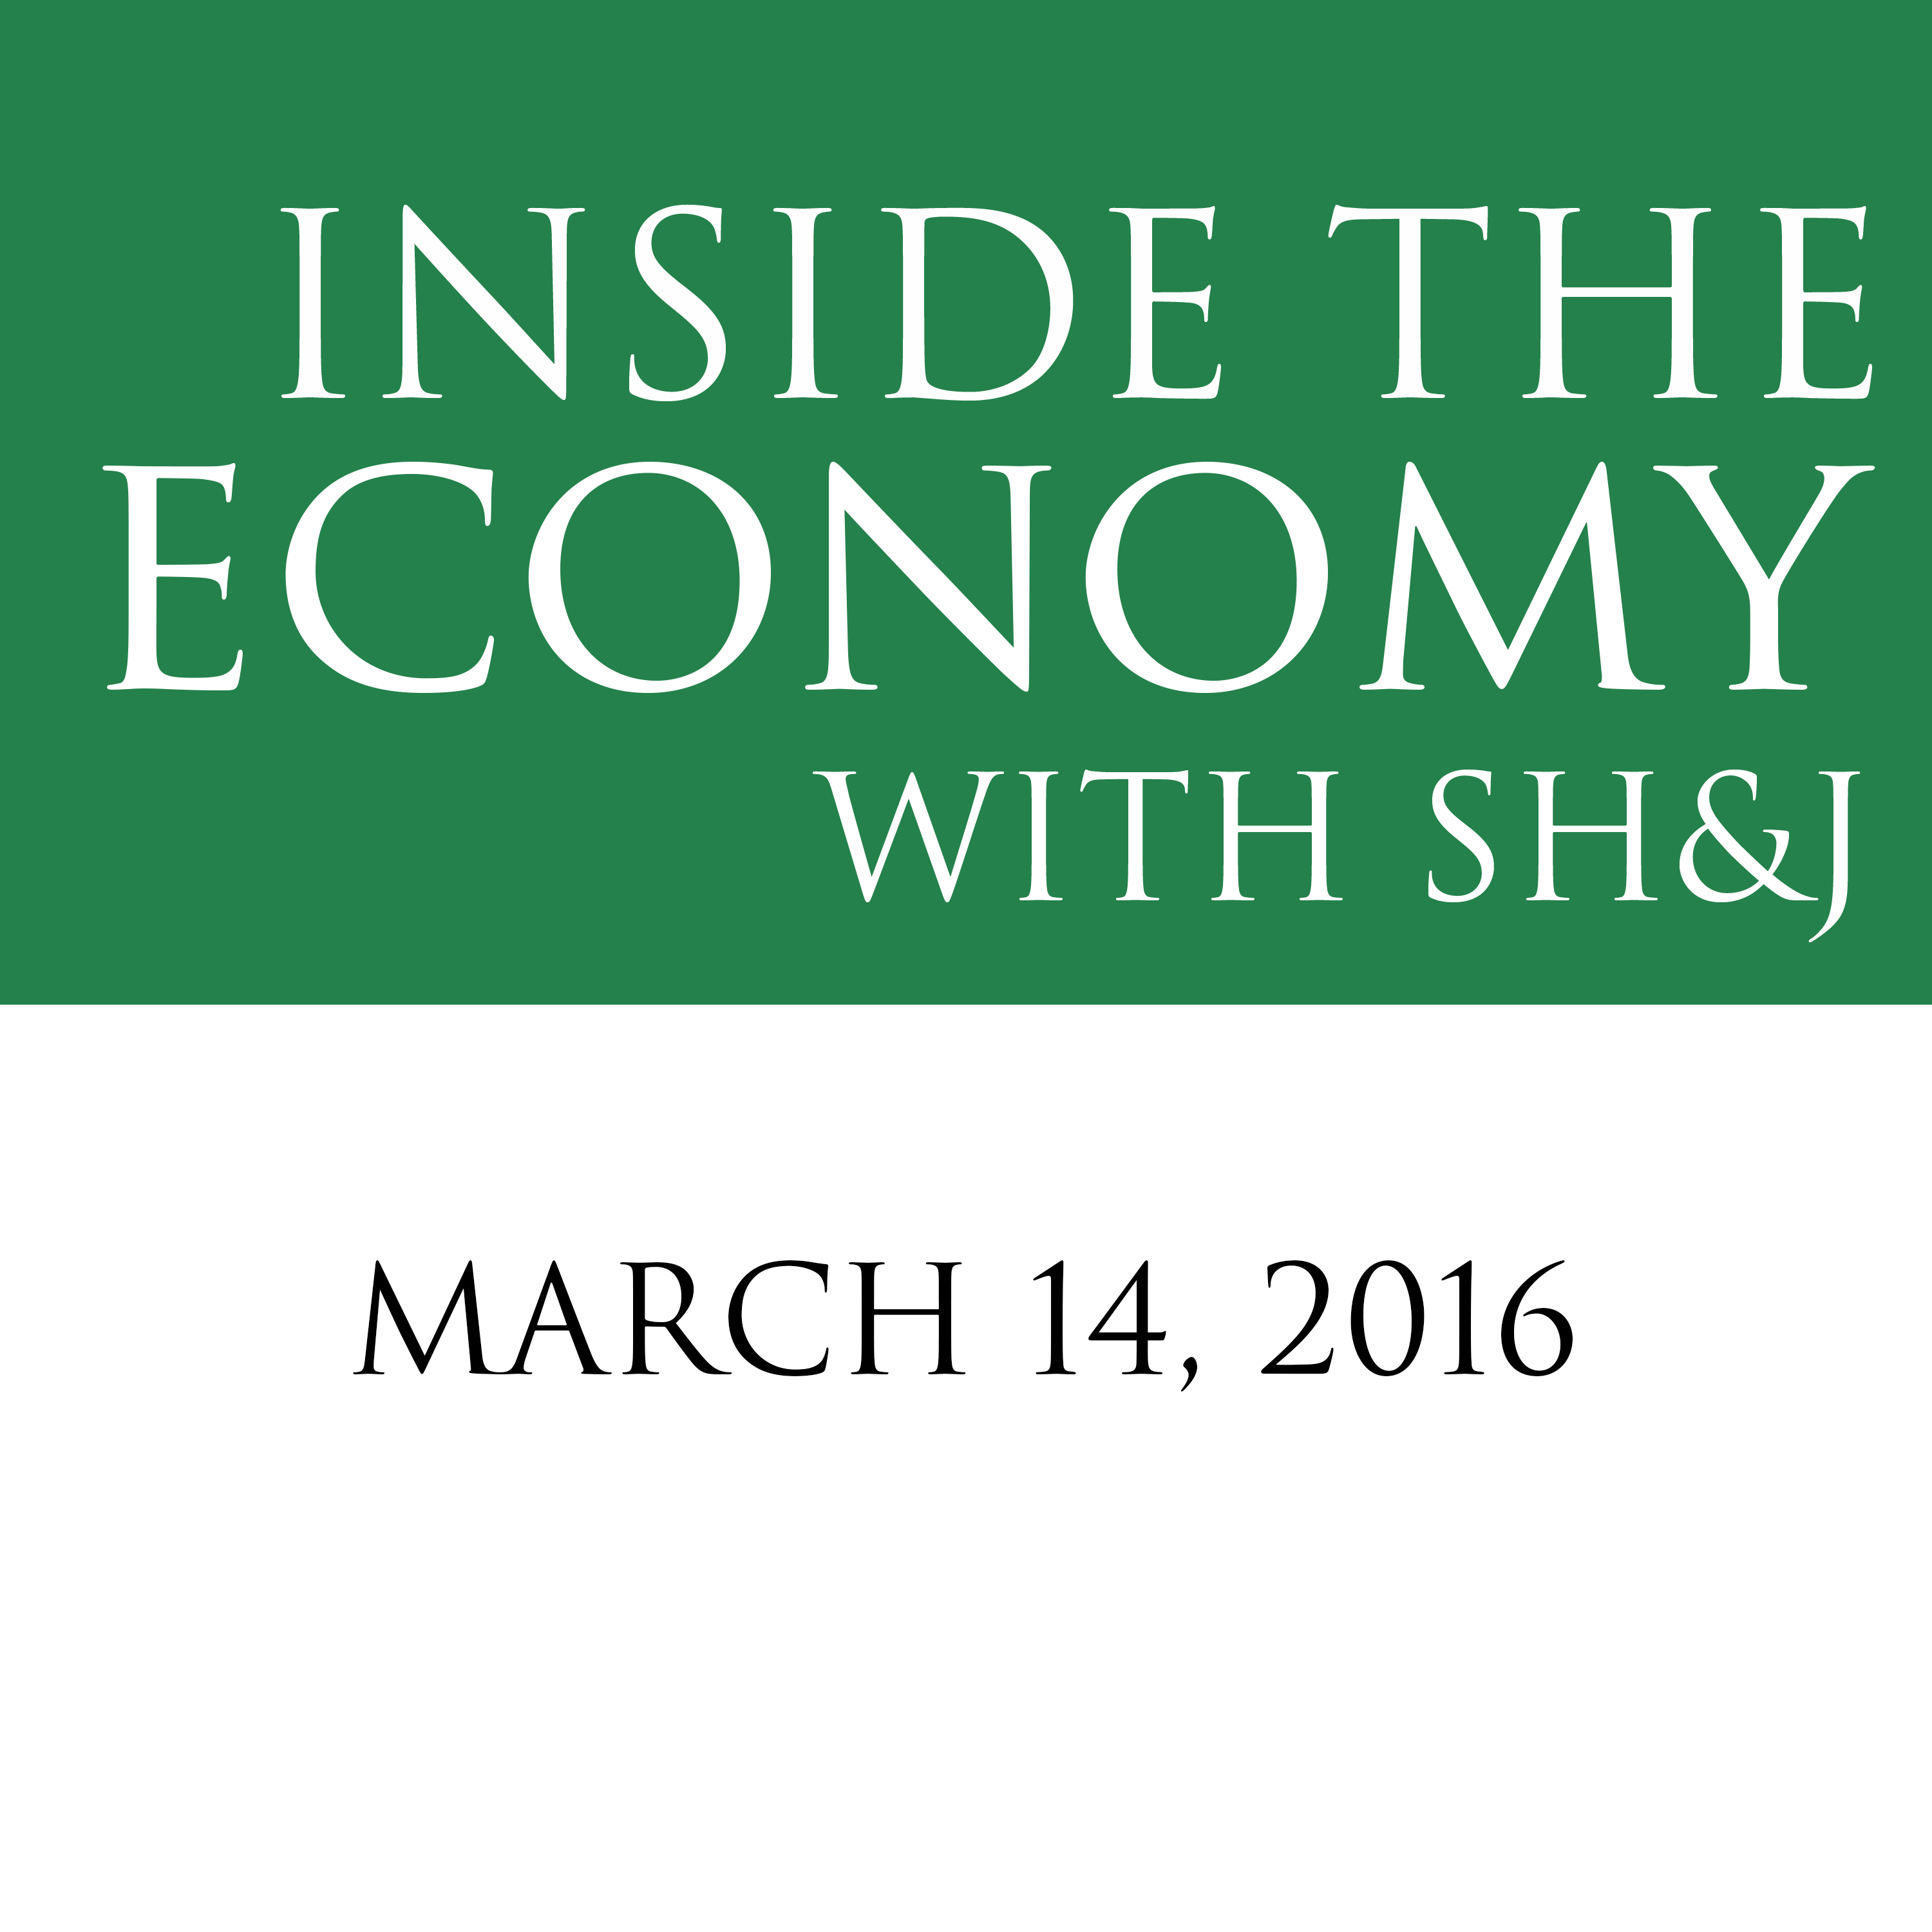 March 14, 2016  --  Inside the Economy With SH&J